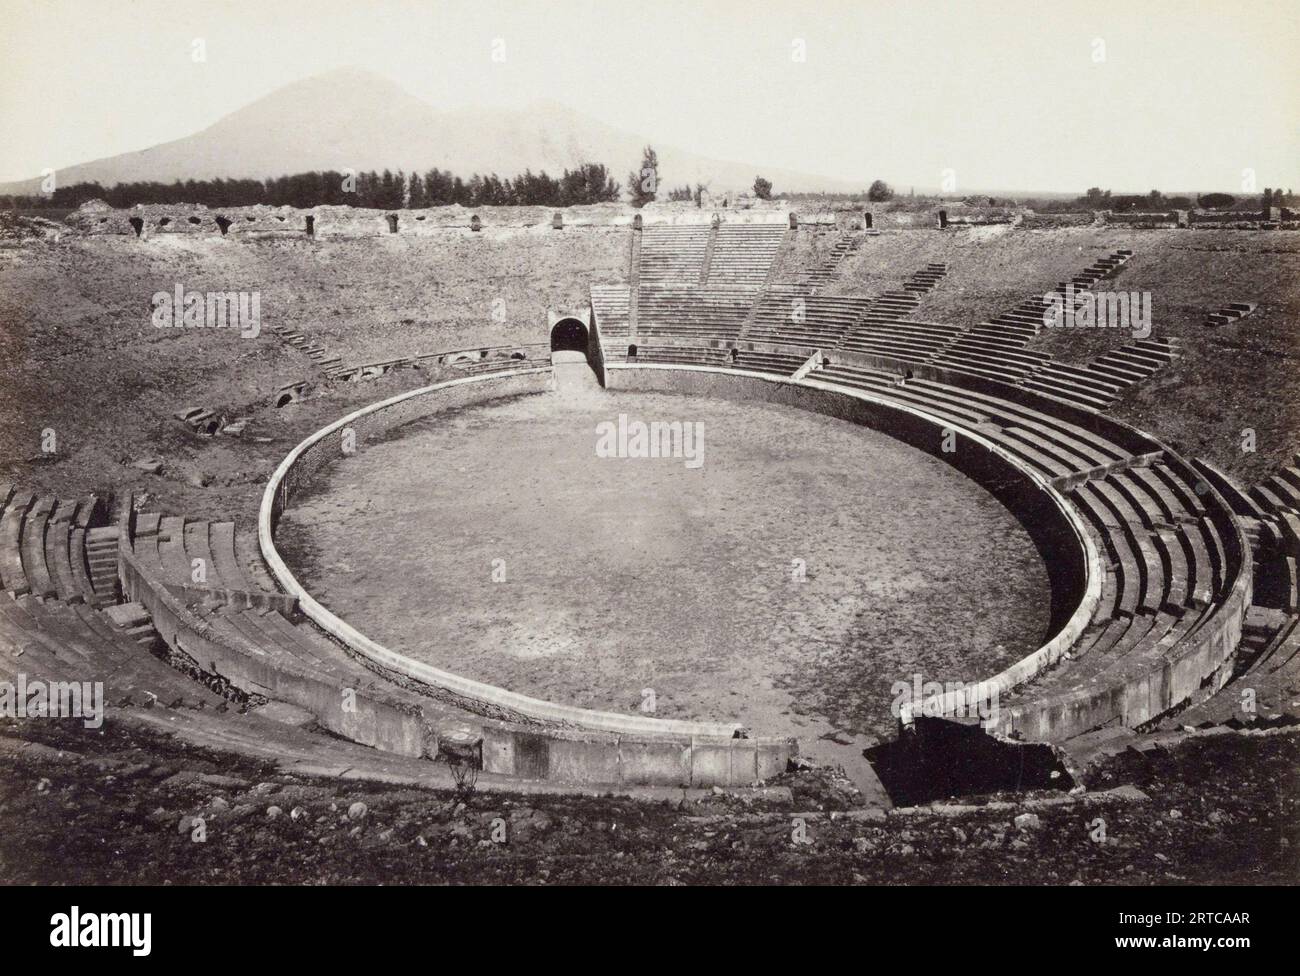 Pompeii Archaeological Site, Campania, Italy.   The excavated Amphitheatre as it was in the late 19th century.  Mt. Vesuvius, the volcano which destroyed the city can be seen in the background. Stock Photo